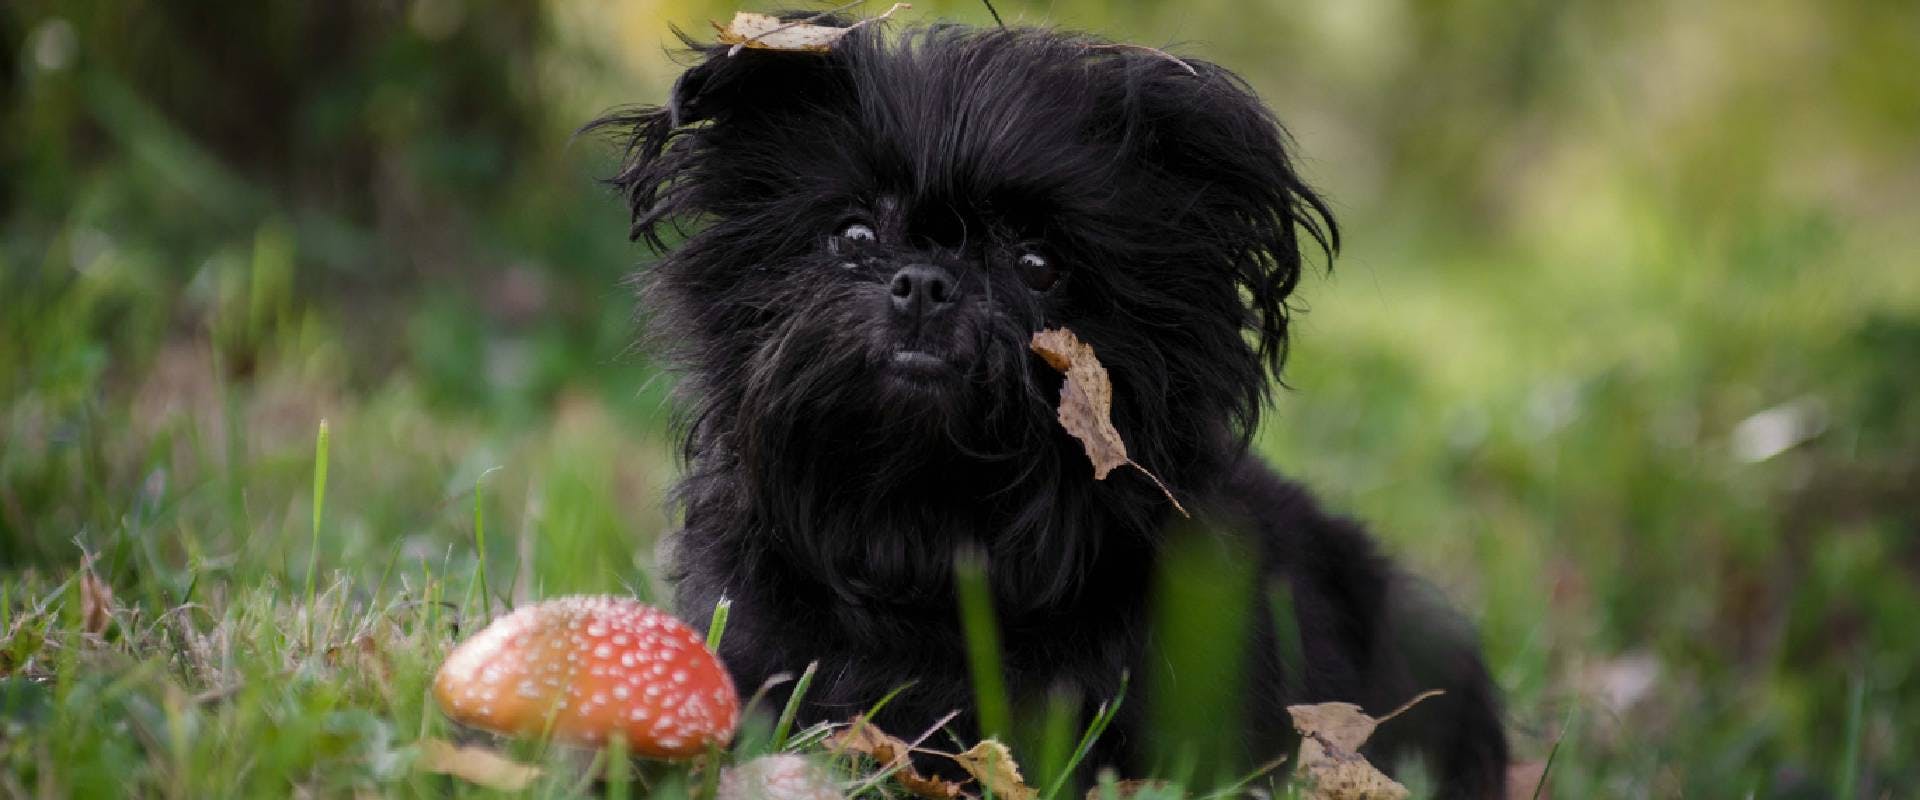 Small black shaggy dog next to a toadstool